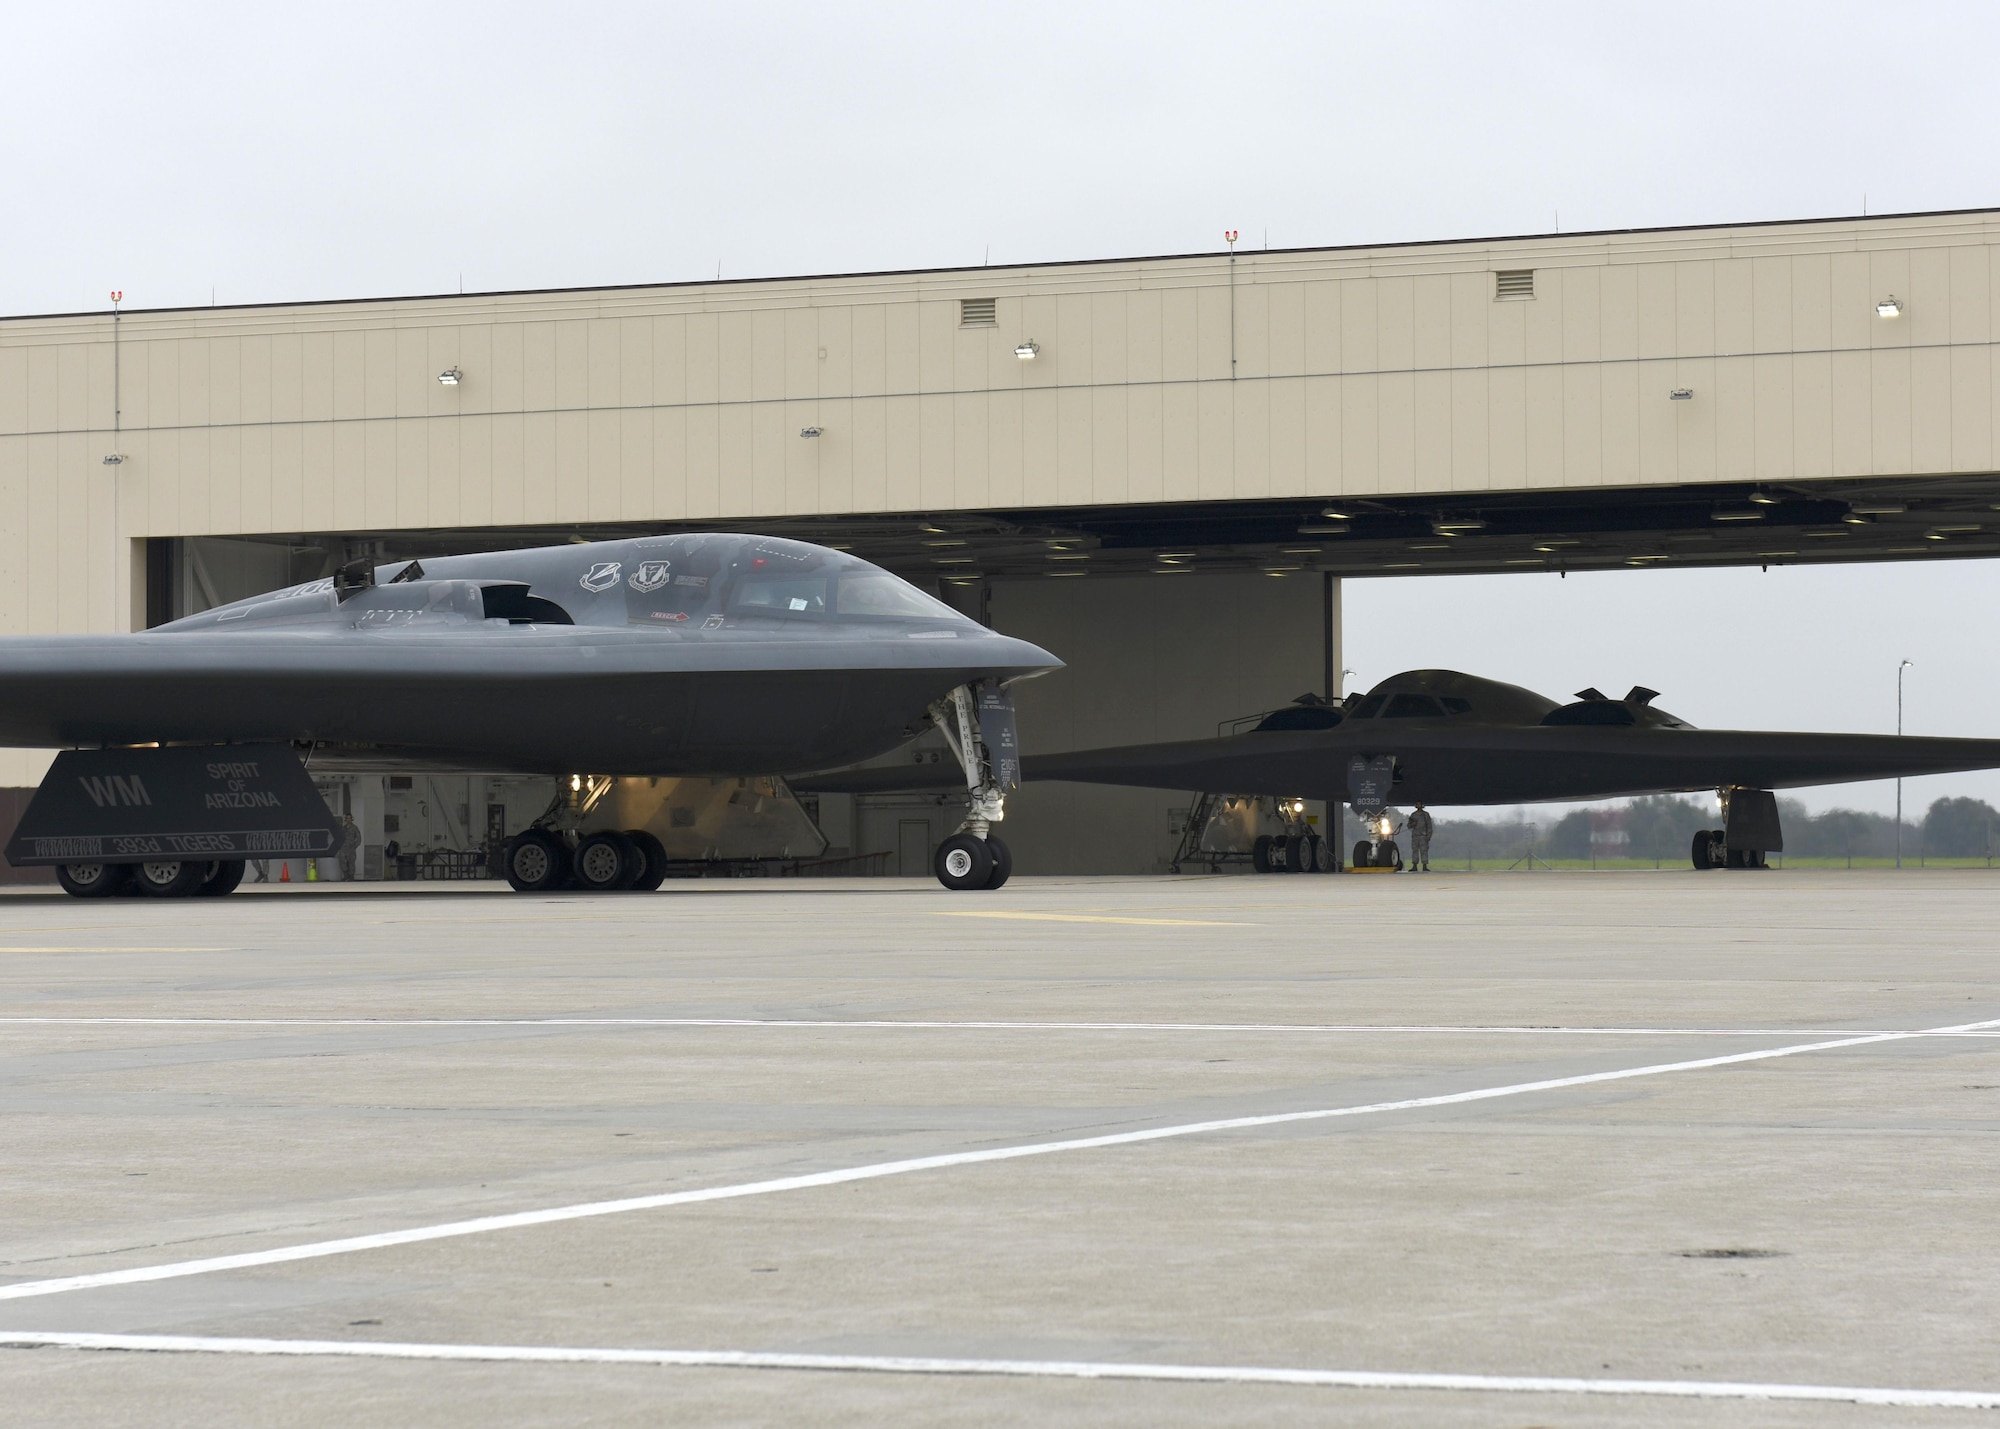 U.S. Air Force B-2 Spirits assigned to Air Force Global Strike Command (AFGSC) prepare to take off from the runway at Whiteman Air Force Base, Mo., Oct 30, 2016, during exercise Global Thunder 17. AFGSC supports U.S. Strategic Command's (USSTRATCOM) global strike and nuclear deterrence missions by providing strategic assets, including bombers like the B-52 and B-2, to ensure a safe, secure, effective and ready deterrent force. Global Thunder is an annual training event that assesses command and control functionality in all USSTRATCOM mission areas and affords component commands a venue to evaluate their joint operational readiness.(U.S. Air Force photo by Senior Airman Danielle Quilla)